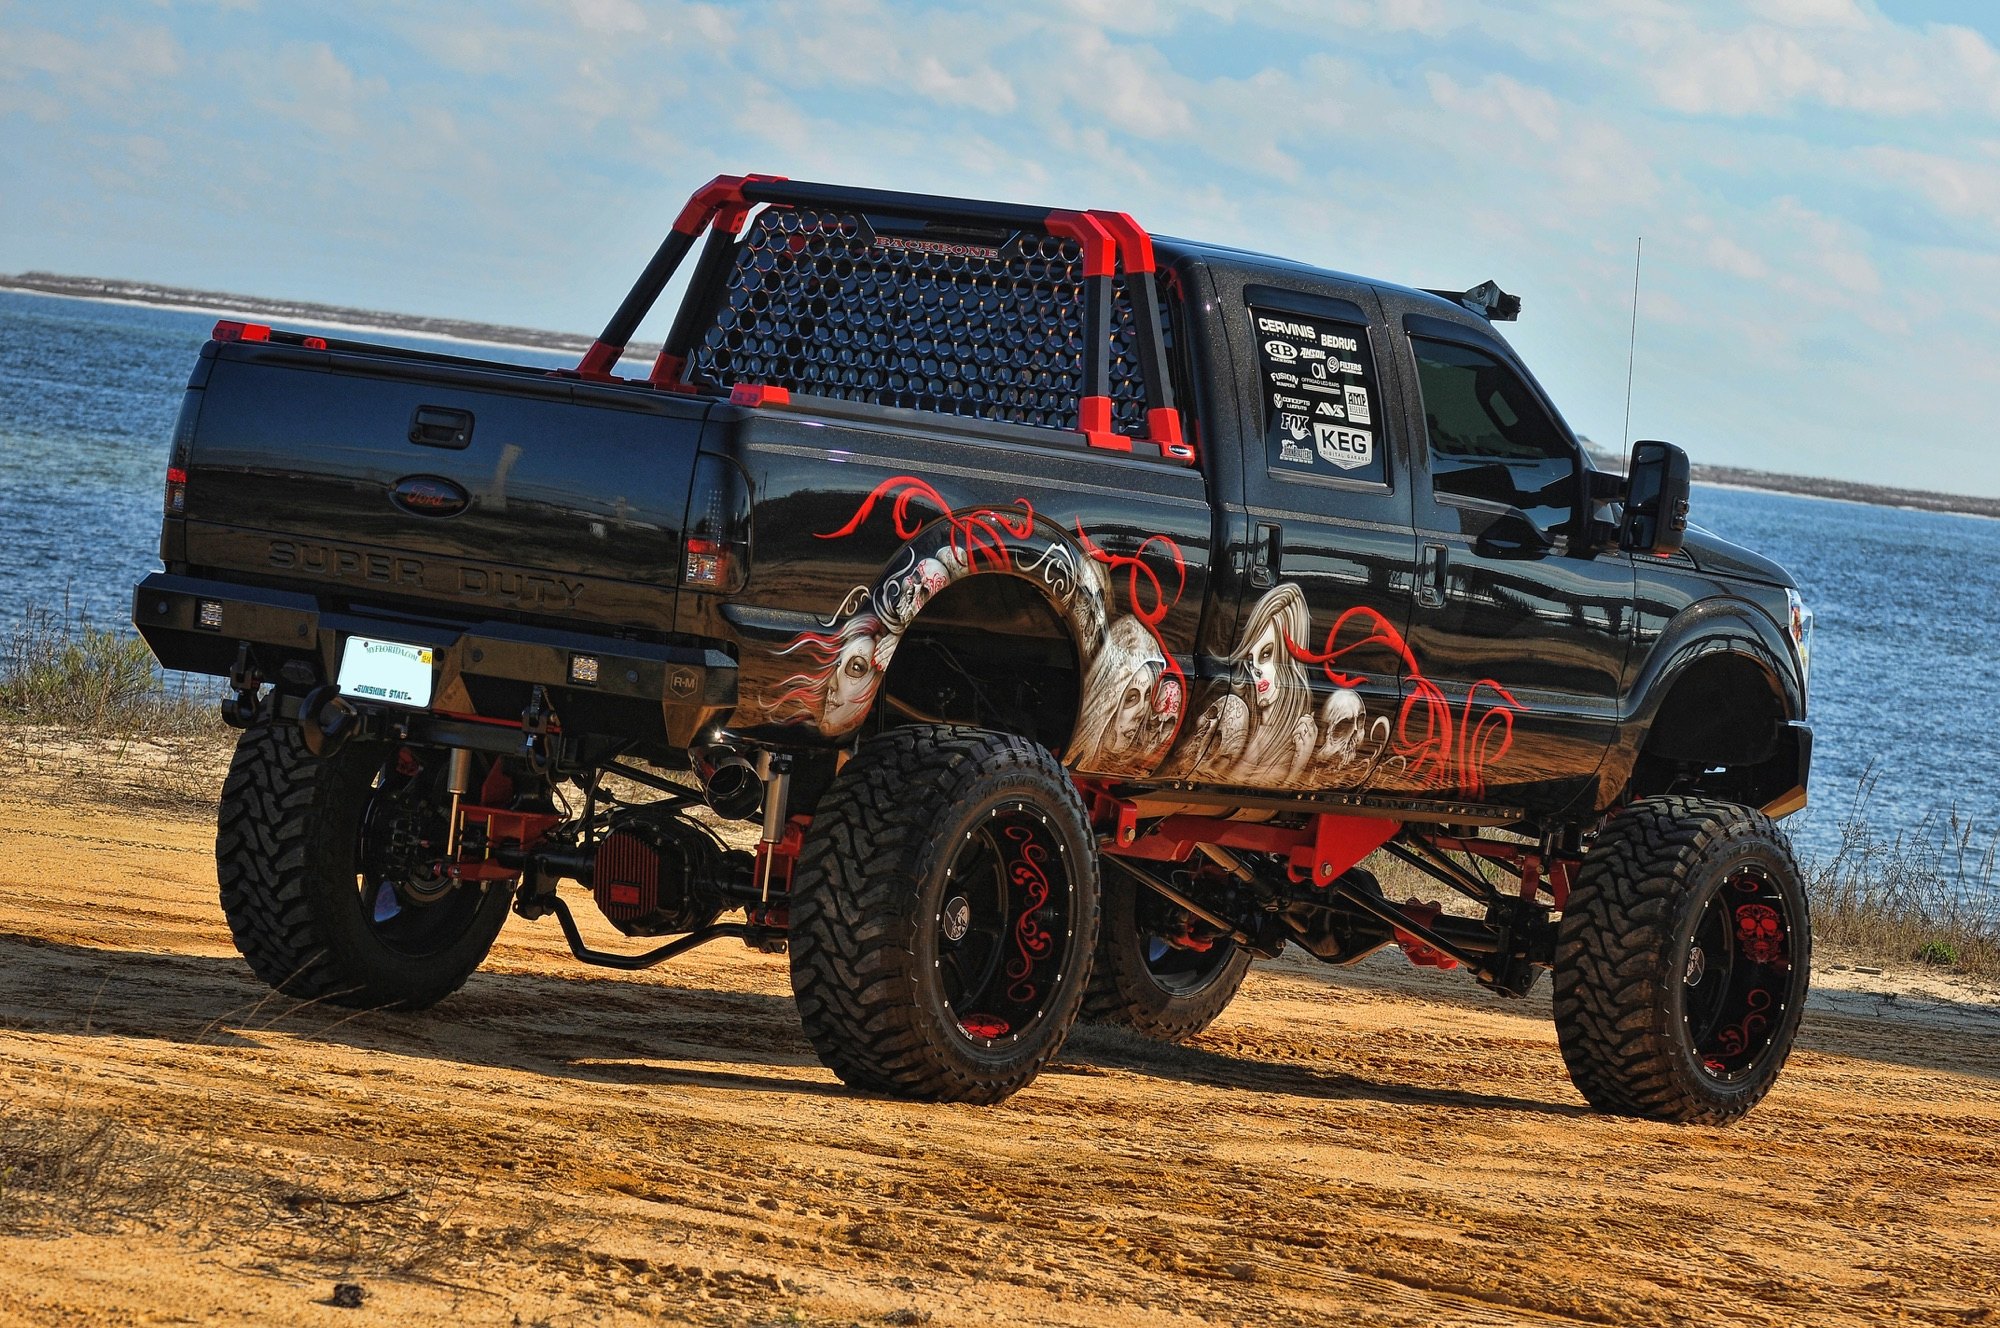 Lifted Ford F250 With Custom Grphics - Photo by Phil Gordon